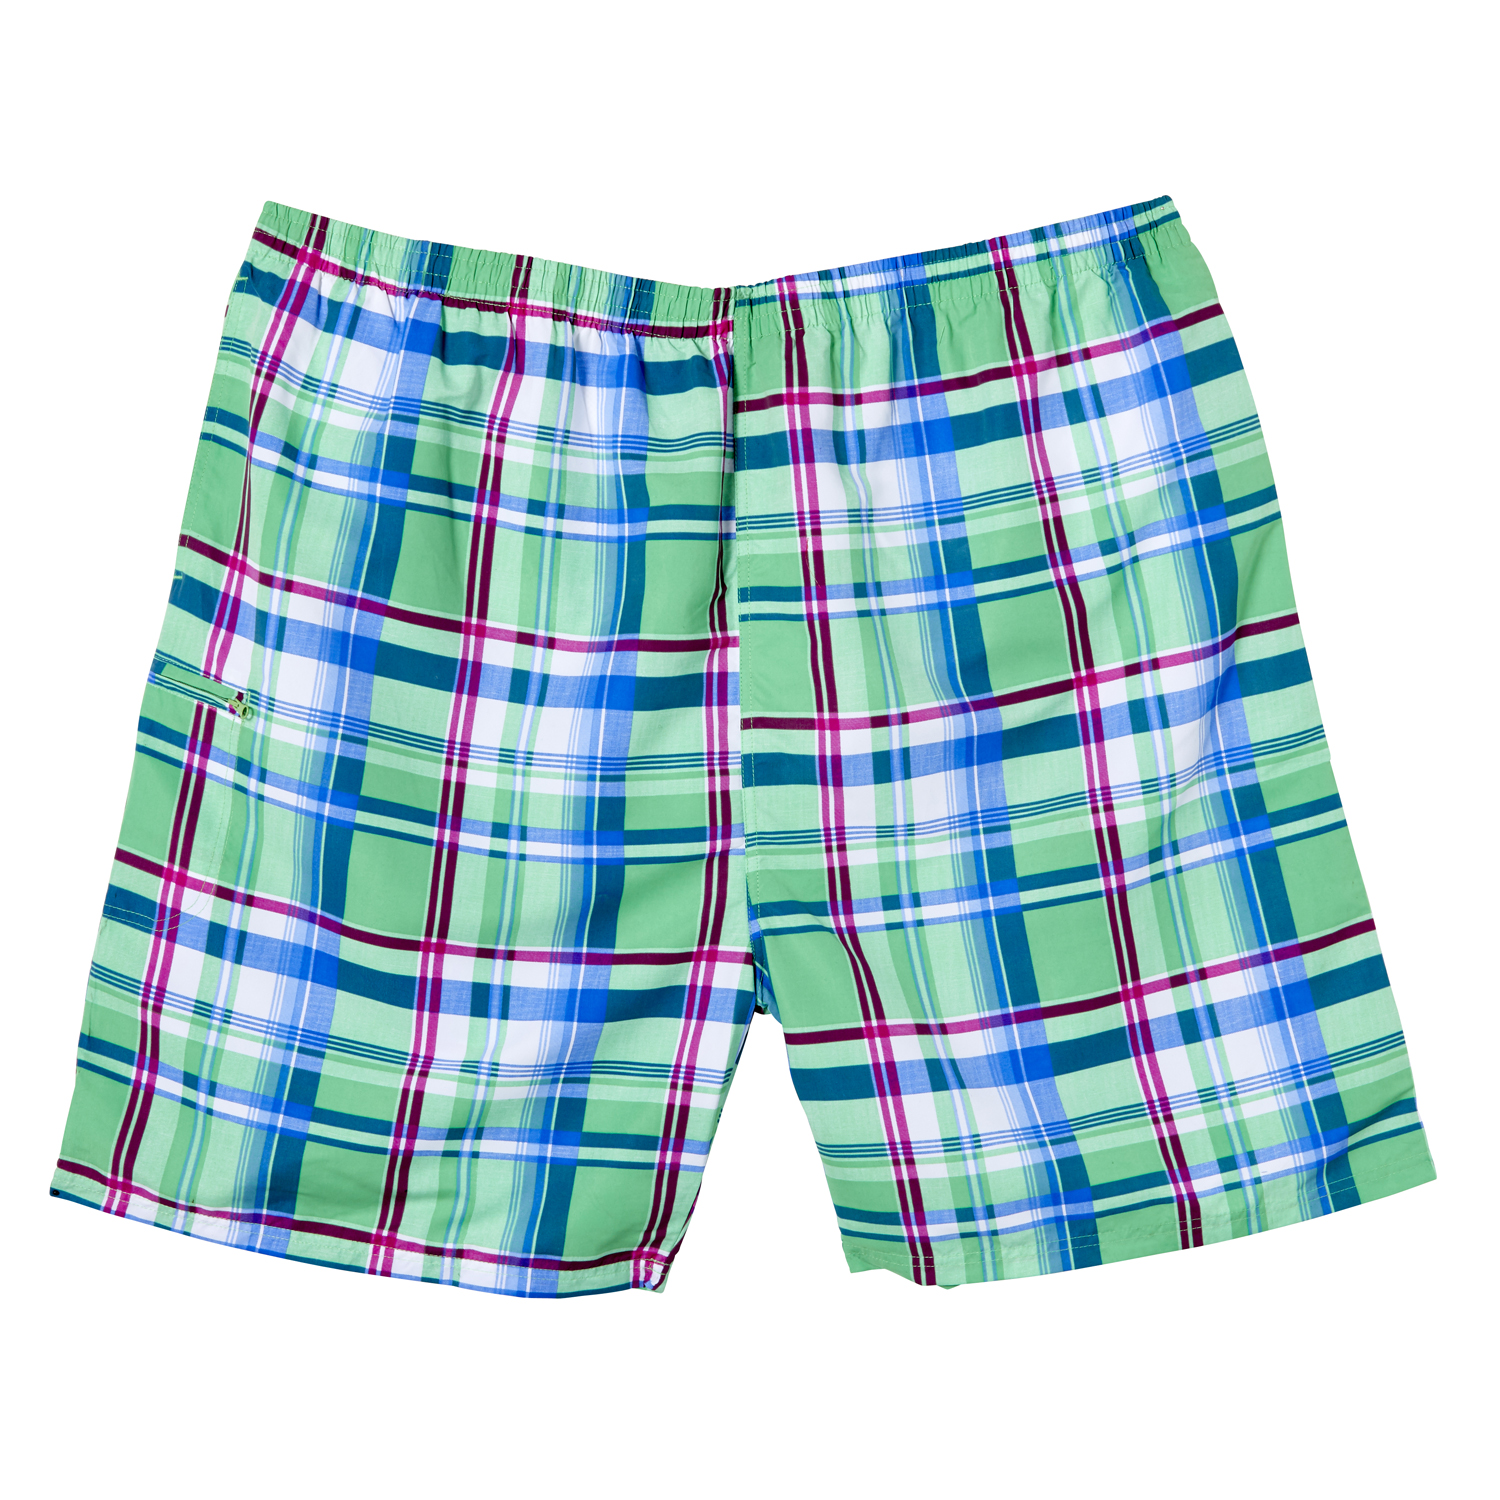 Swim bermuda by eleMar for men light green checkered in oversizes up to 10XL